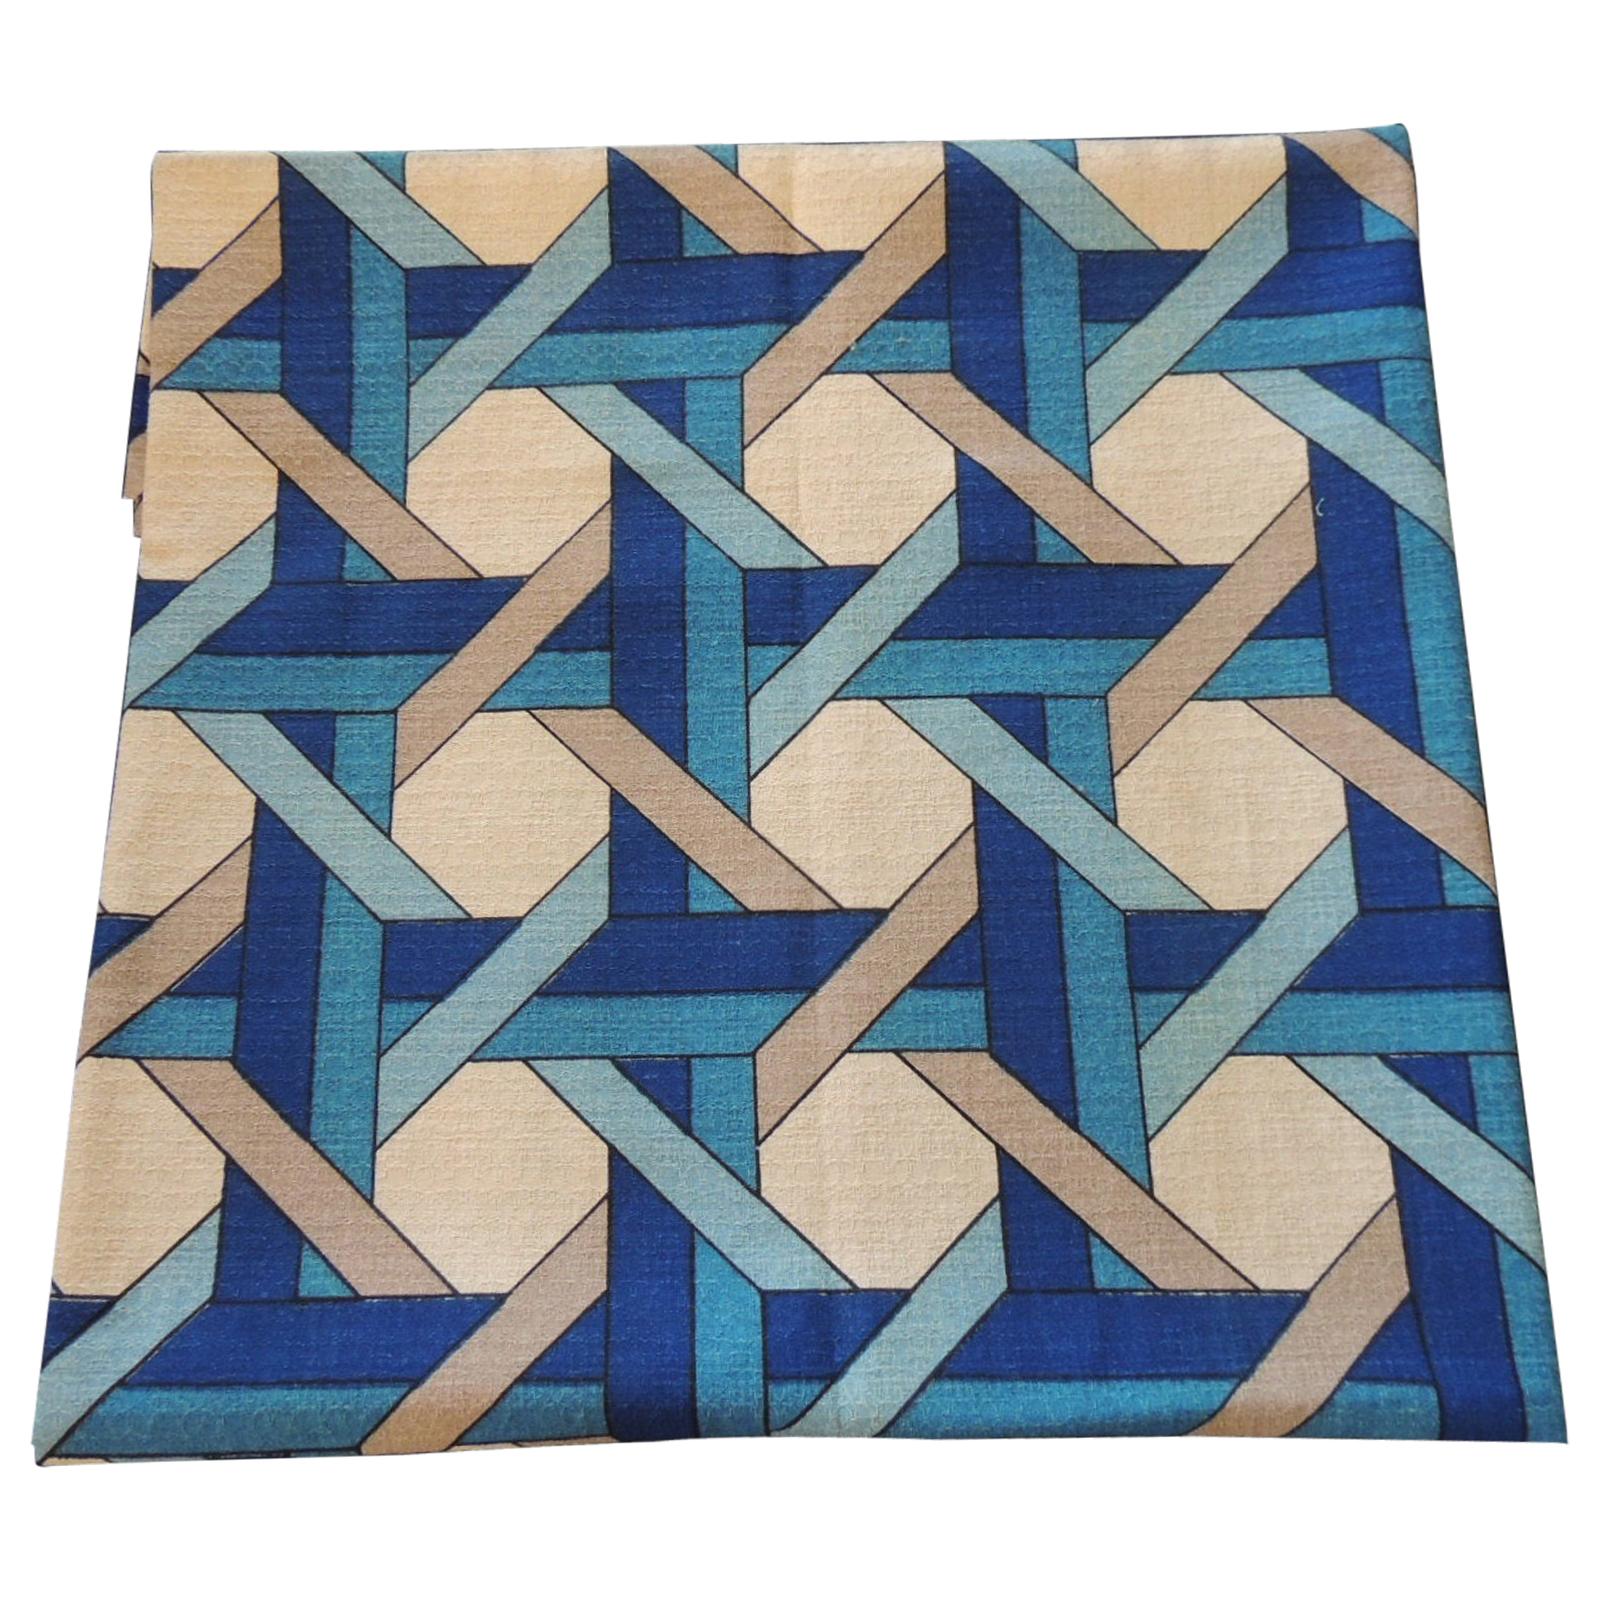 Fabric by The Yard Vintage Blue and Tan Trellis Pattern Bark Cloth Textile